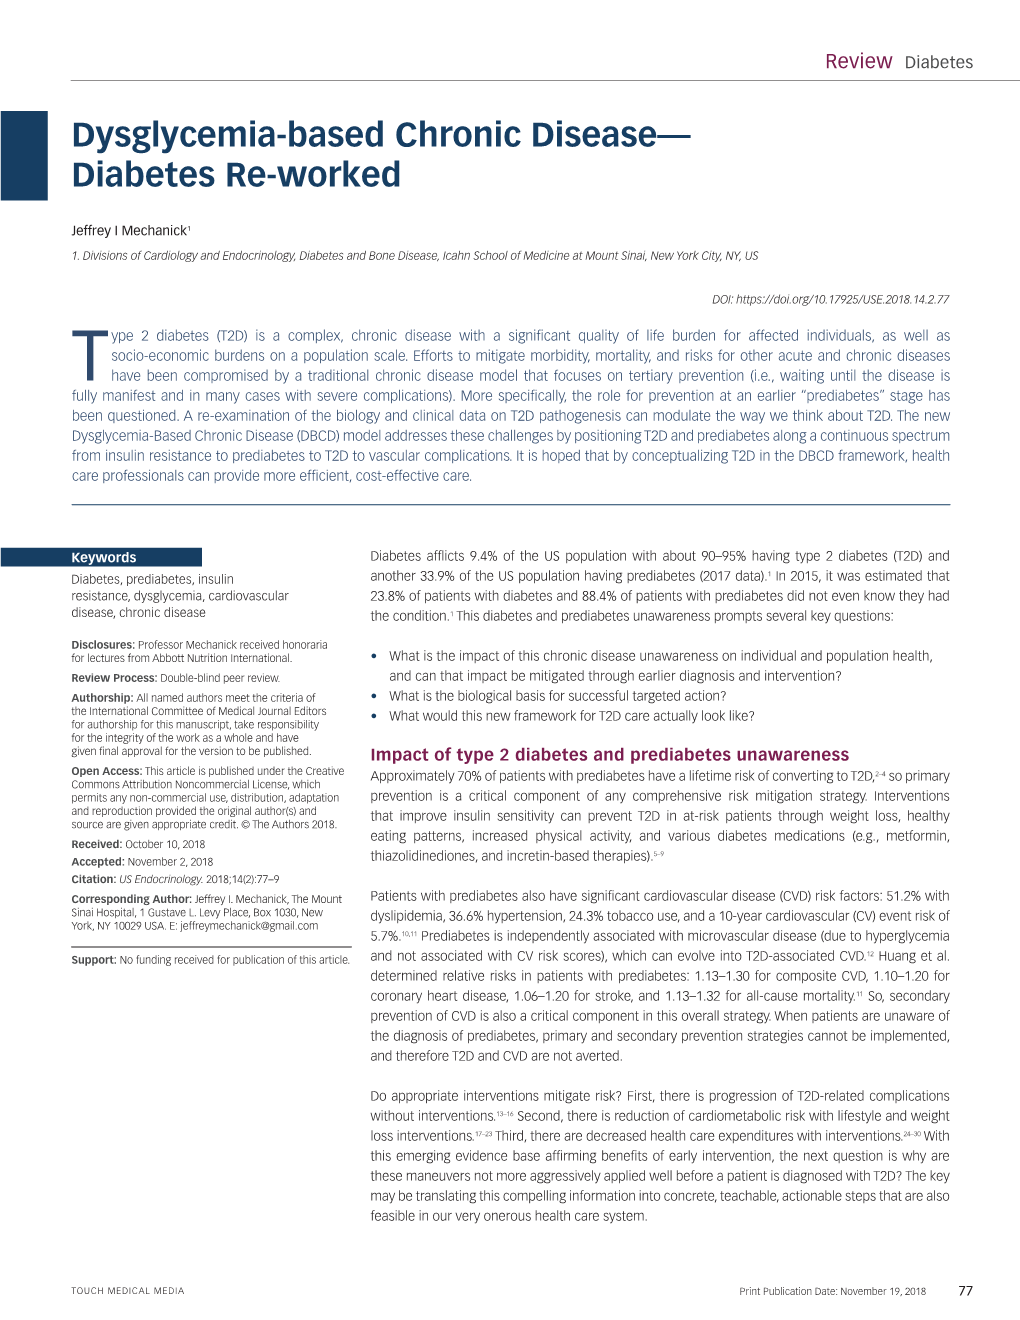 Dysglycemia-Based Chronic Disease— Diabetes Re-Worked